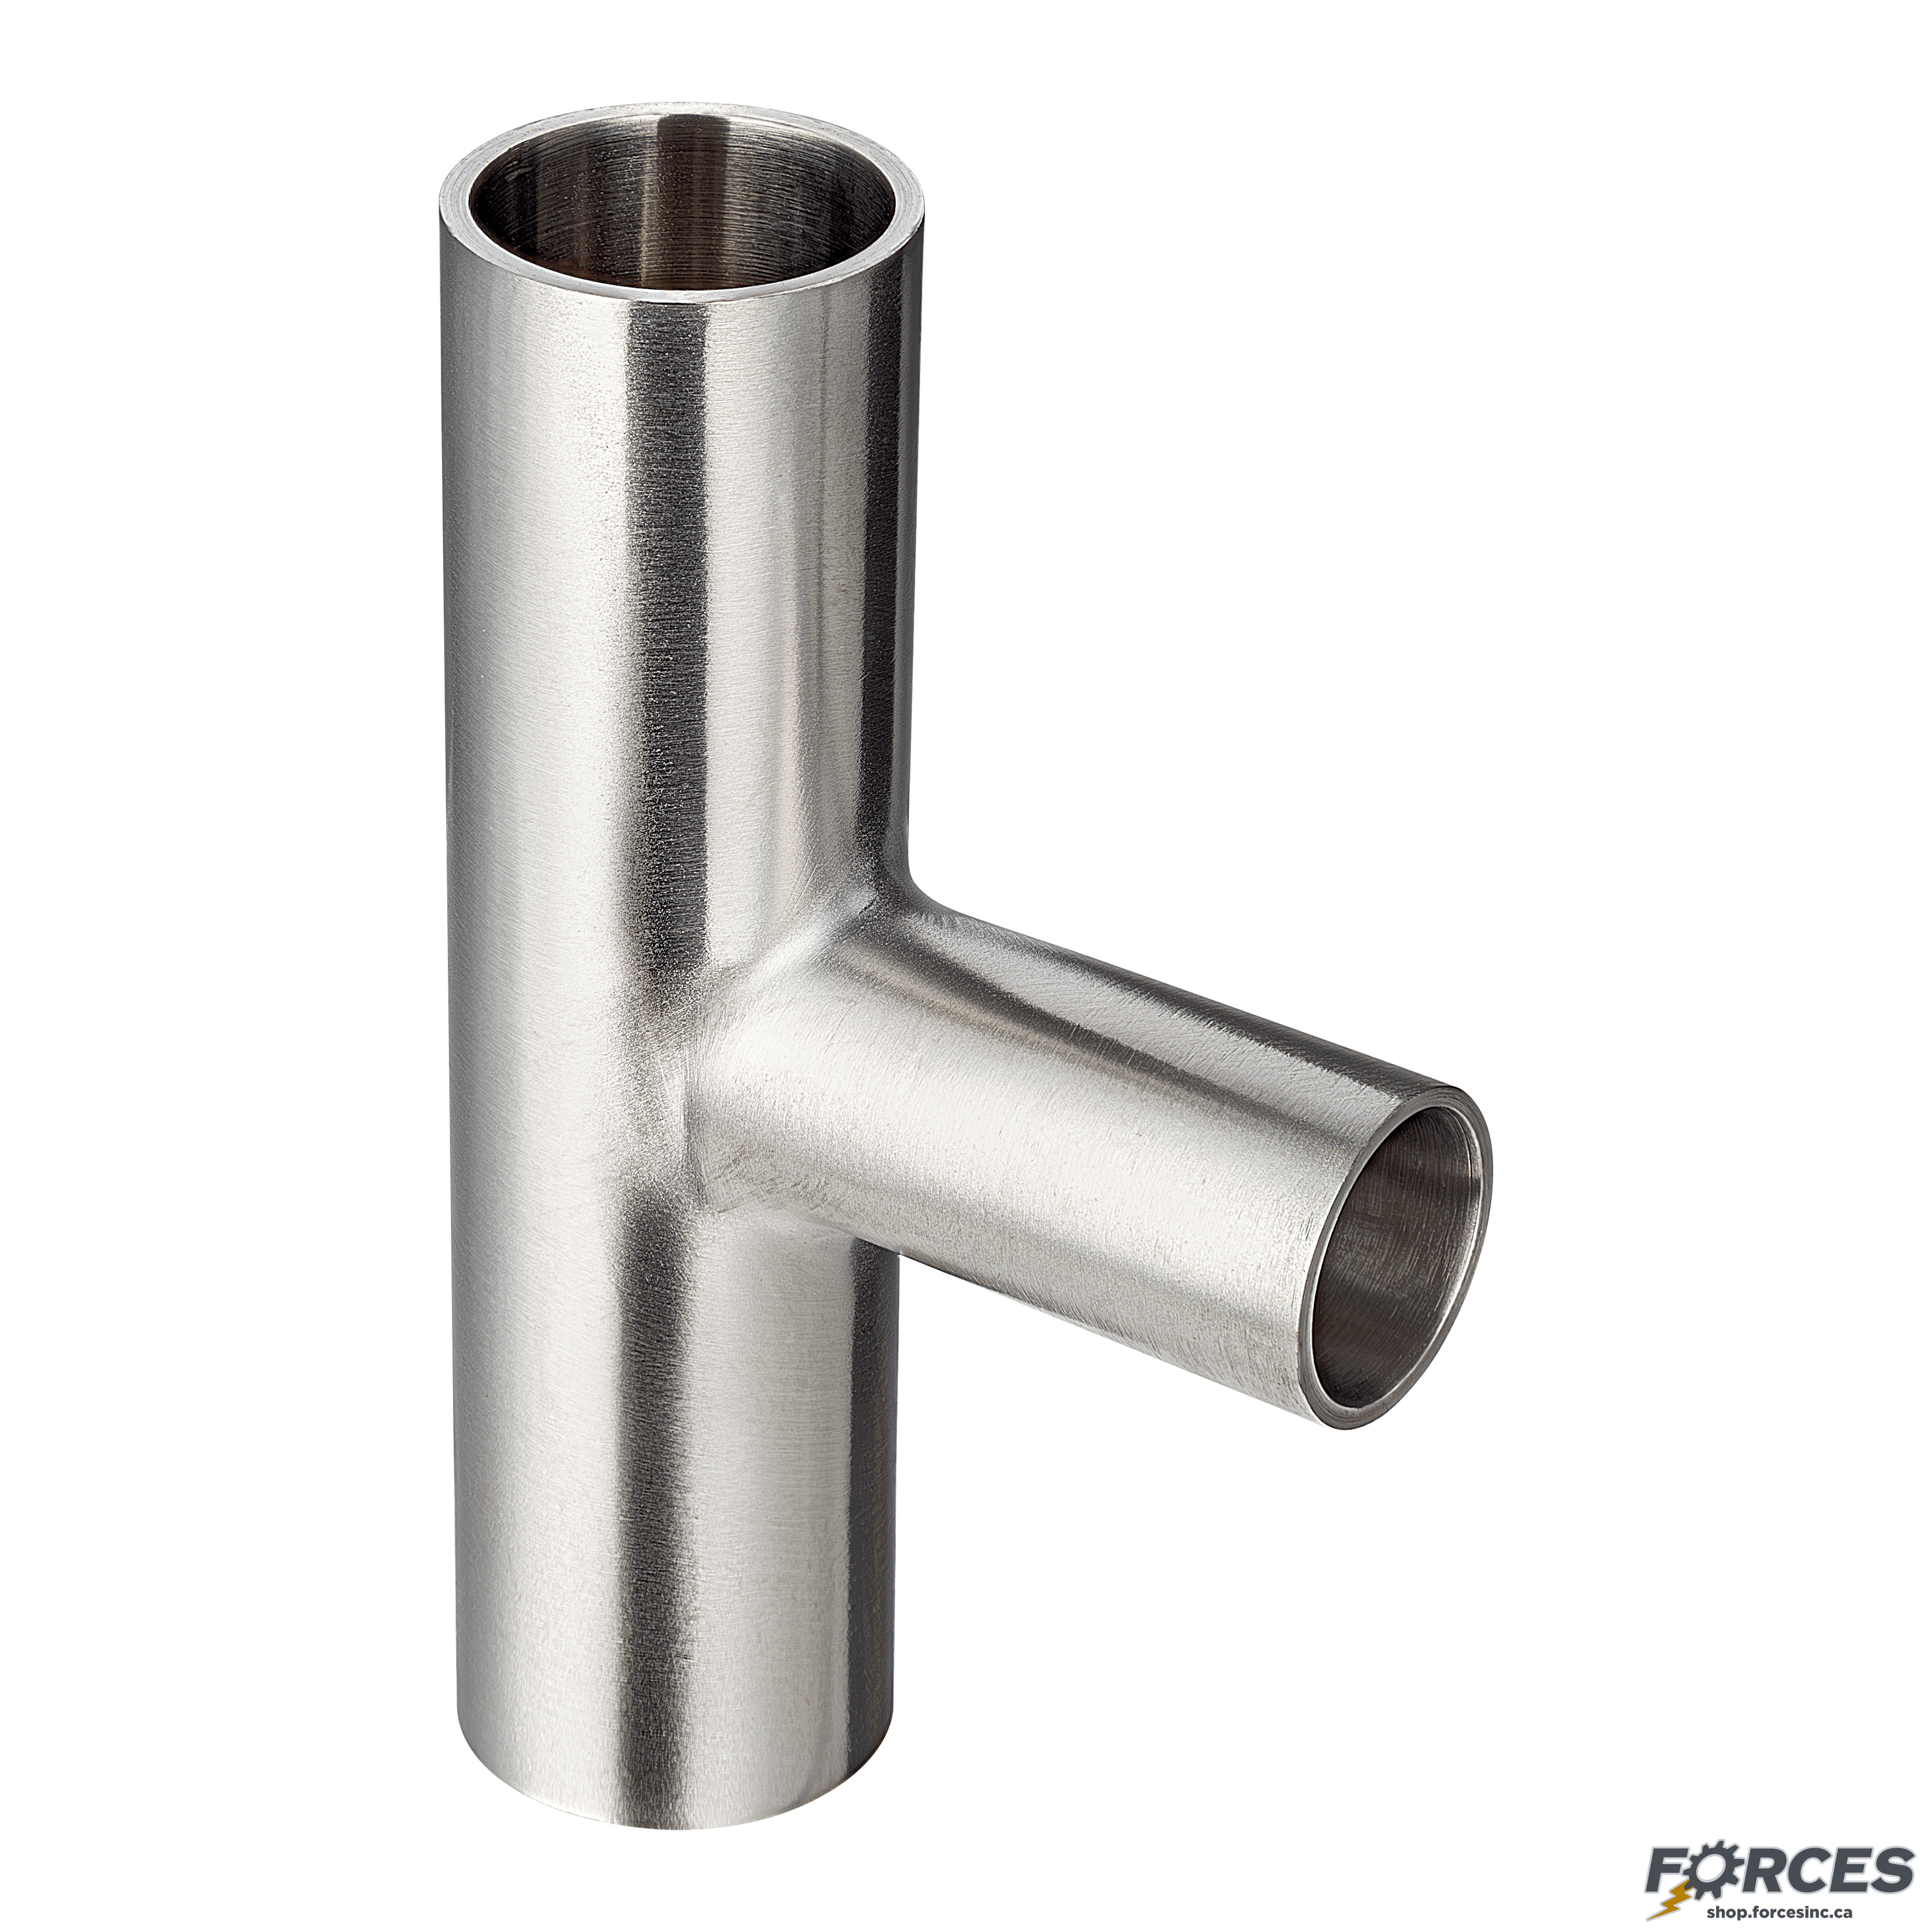 4" x 3" Butt Weld Tee Reducer - Stainless Steel 316 - Forces Inc